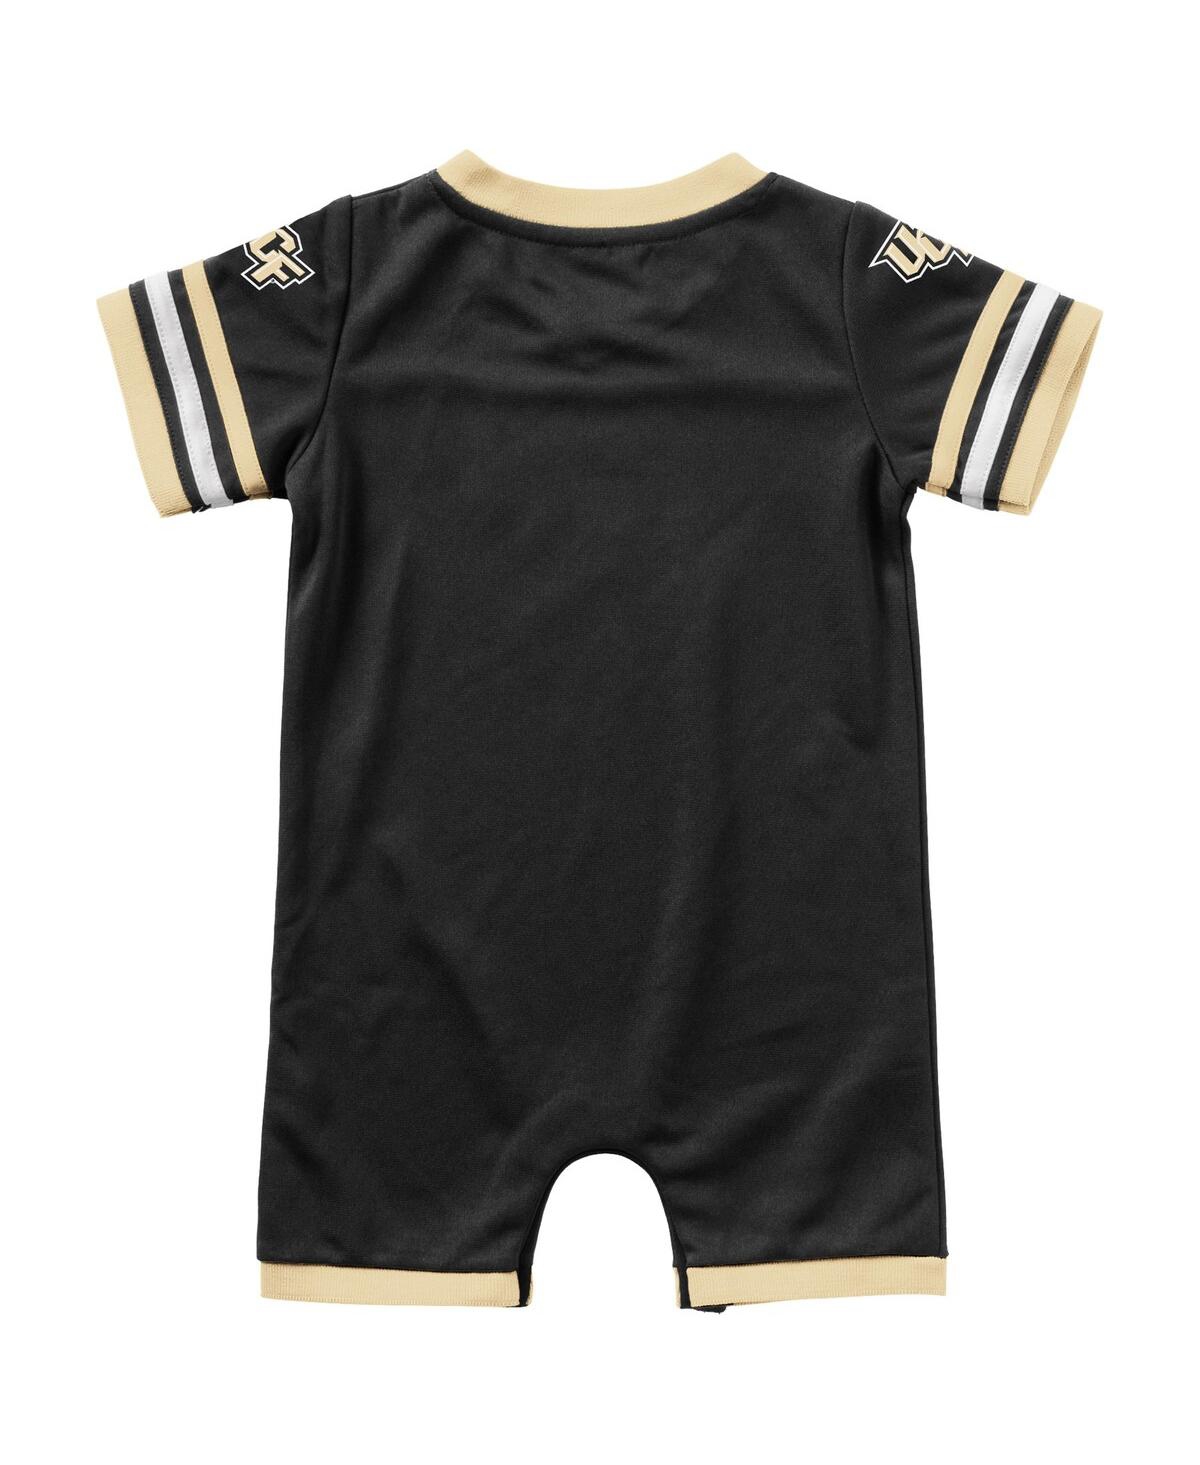 Shop Colosseum Newborn And Infant Boys And Girls  Black Ucf Knights Bumpo Football Romper